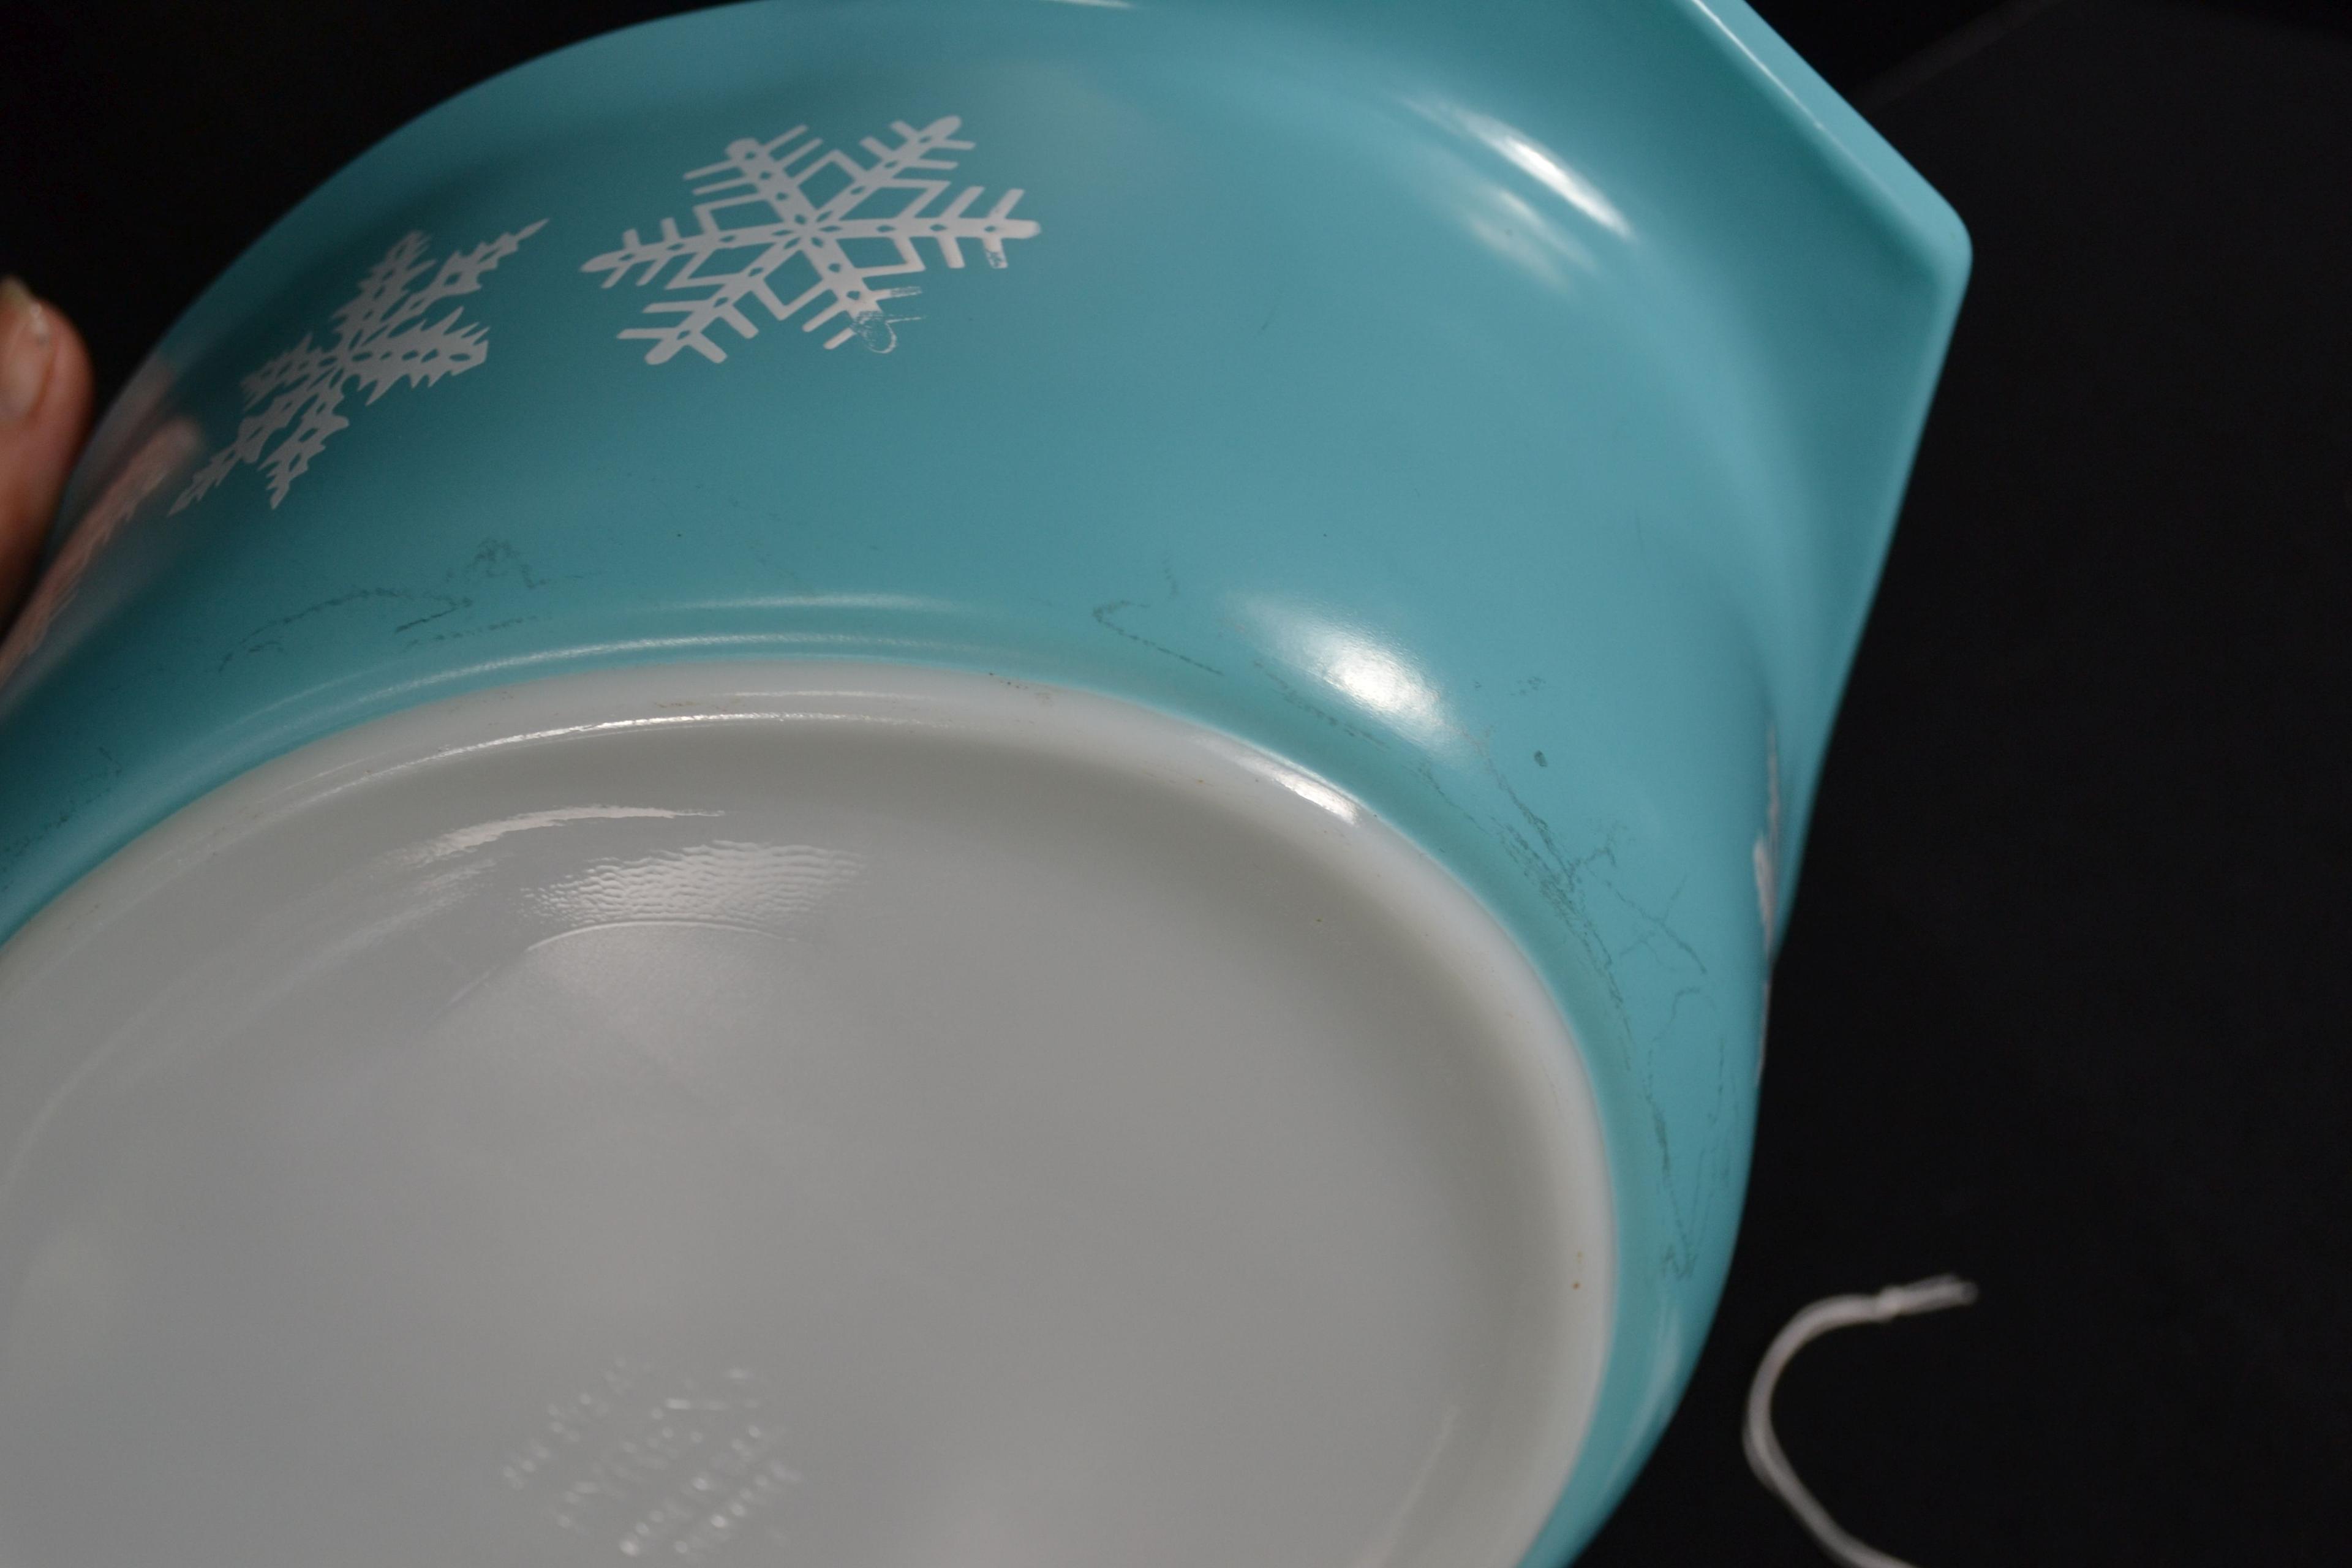 Pyrex White Snowflake on Turquoise No. 045 Casserole w/Lid; Mfg. 1956-1967